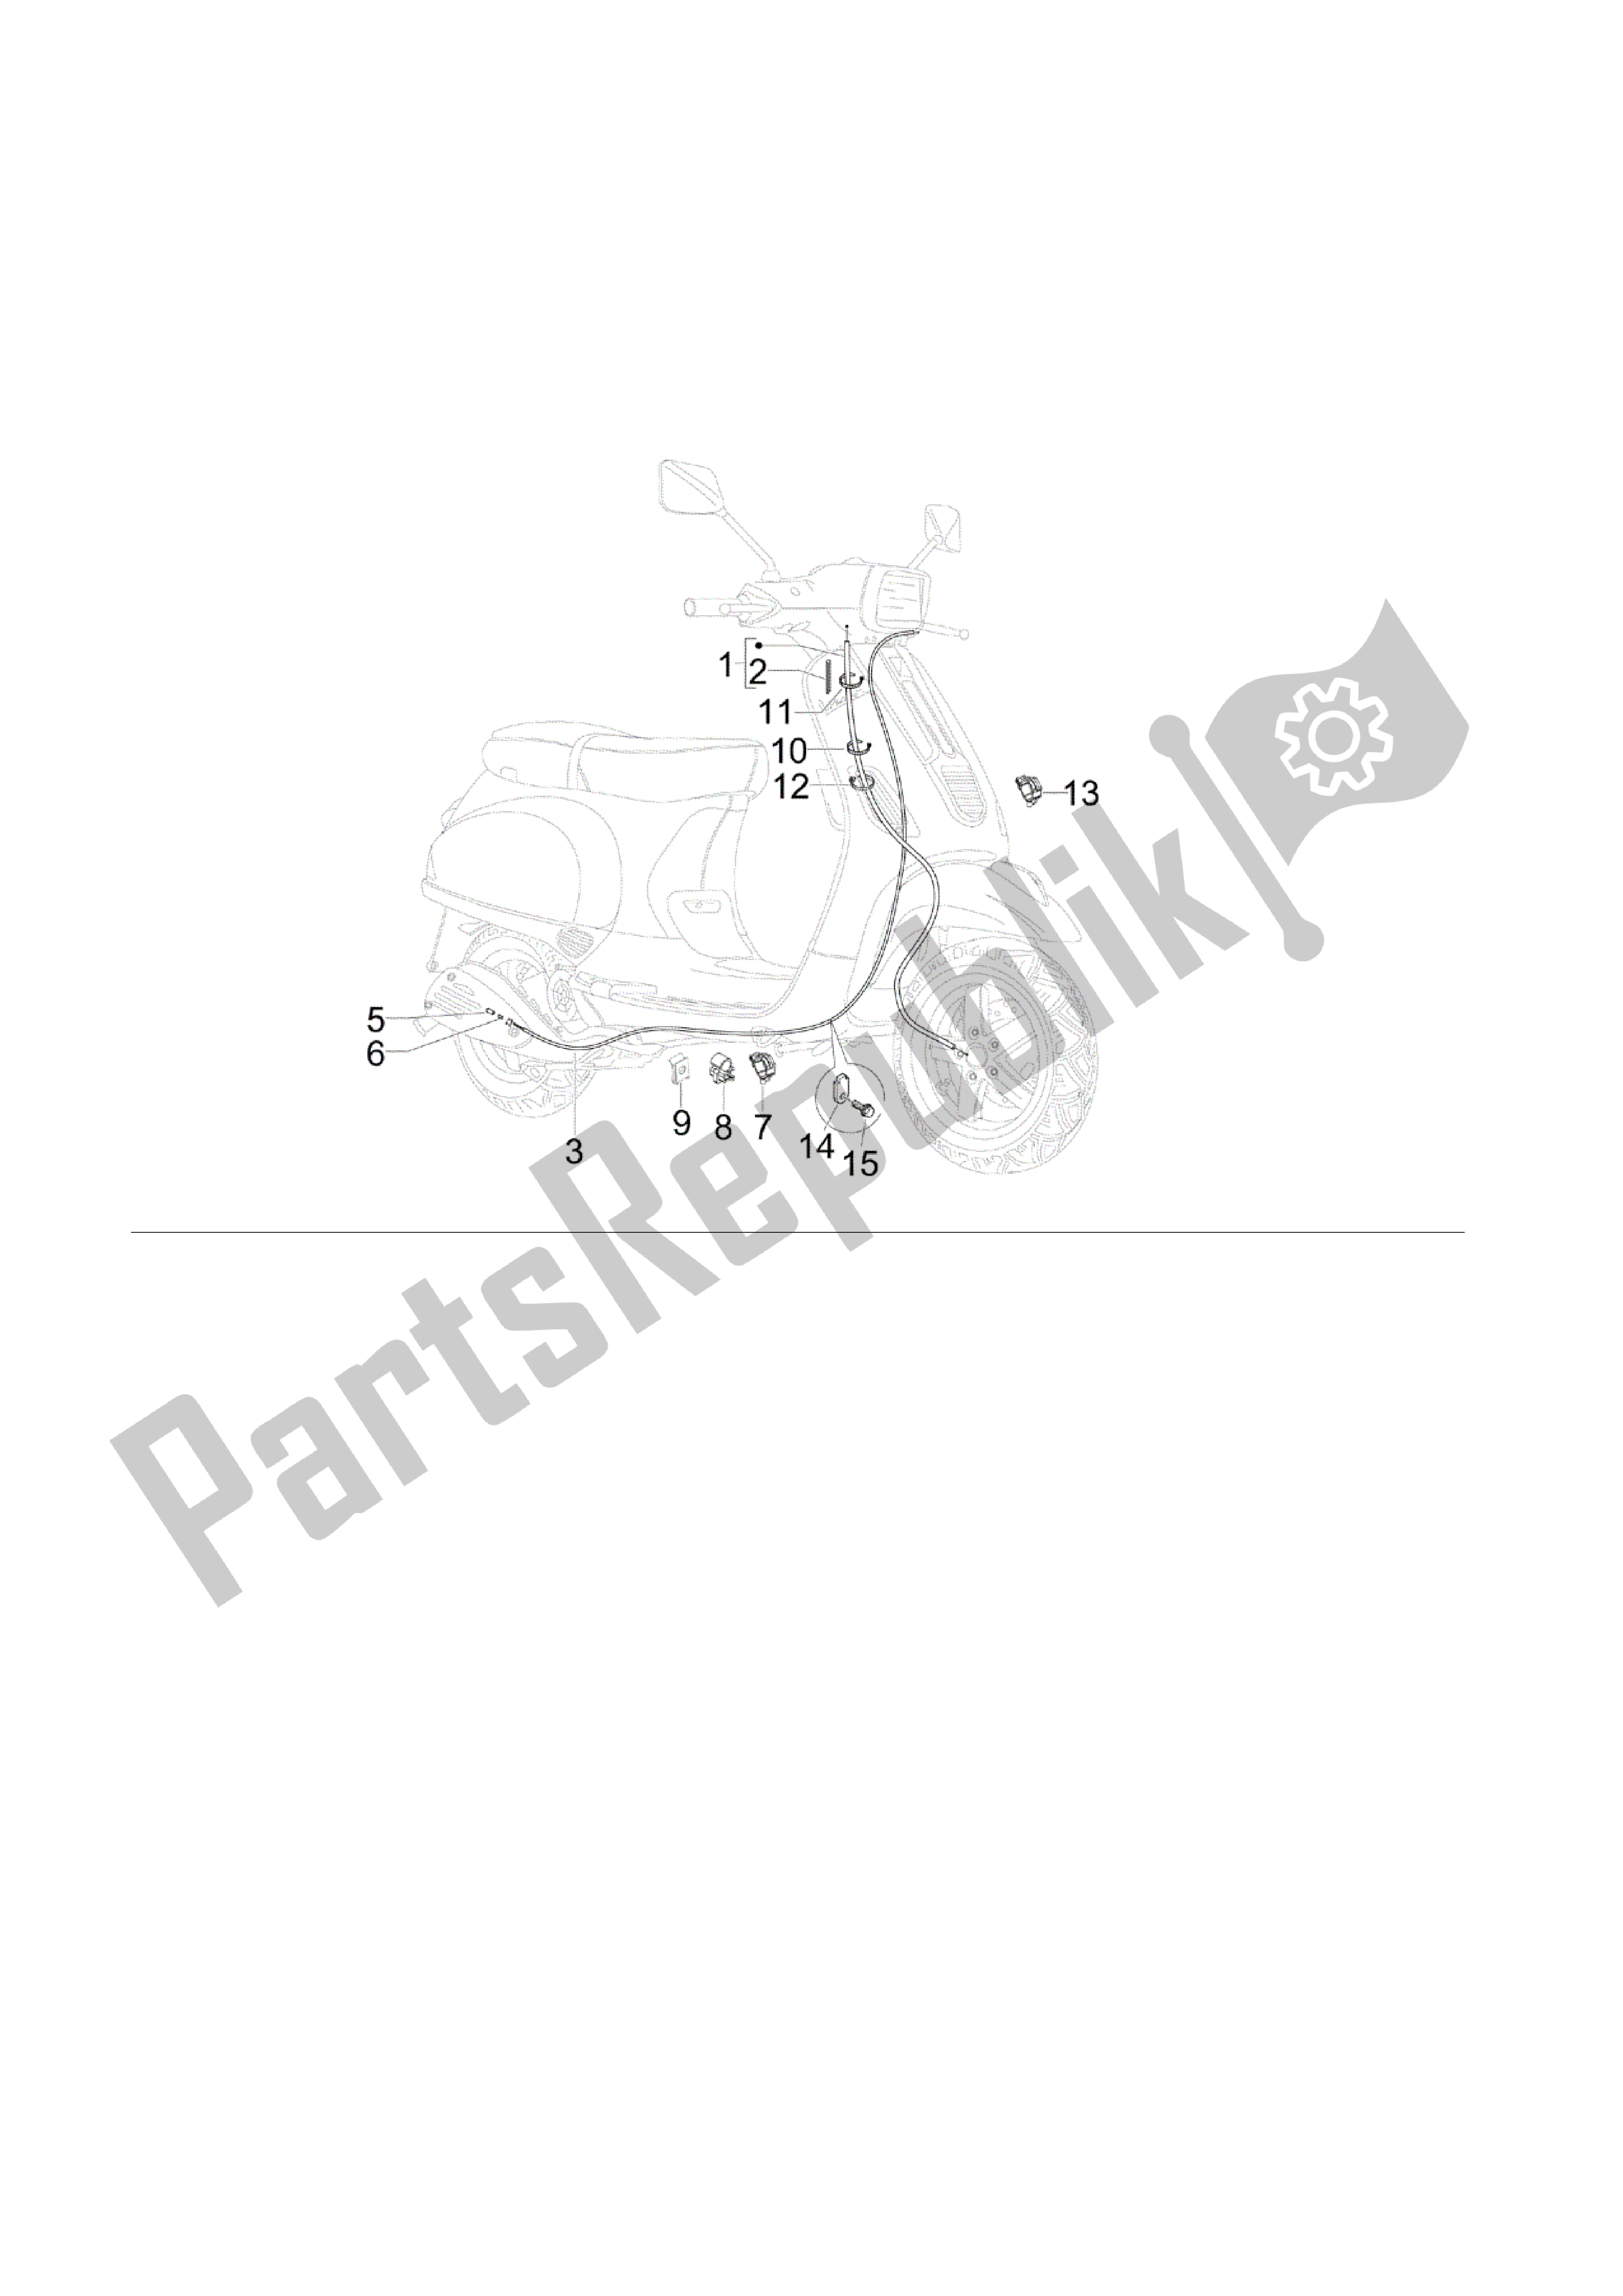 All parts for the Transmisiónes of the Vespa S 50 2008 - 2012